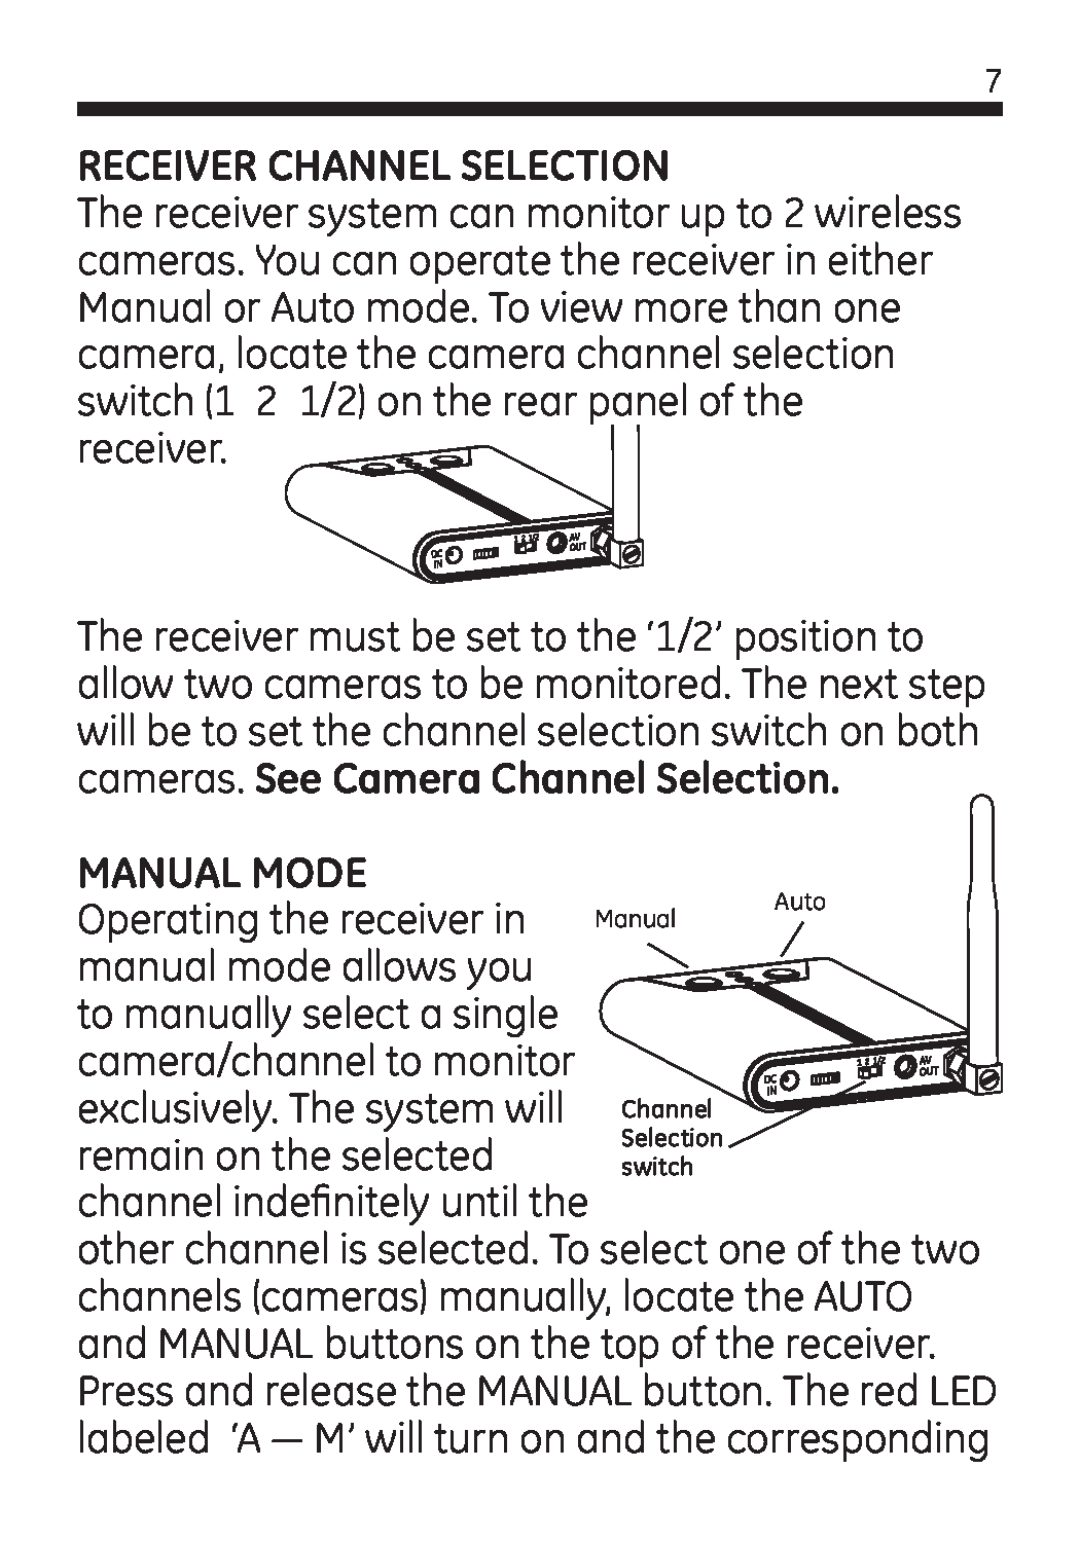 Jasco 45246 user manual Receiver Channel Selection, Manual Mode 